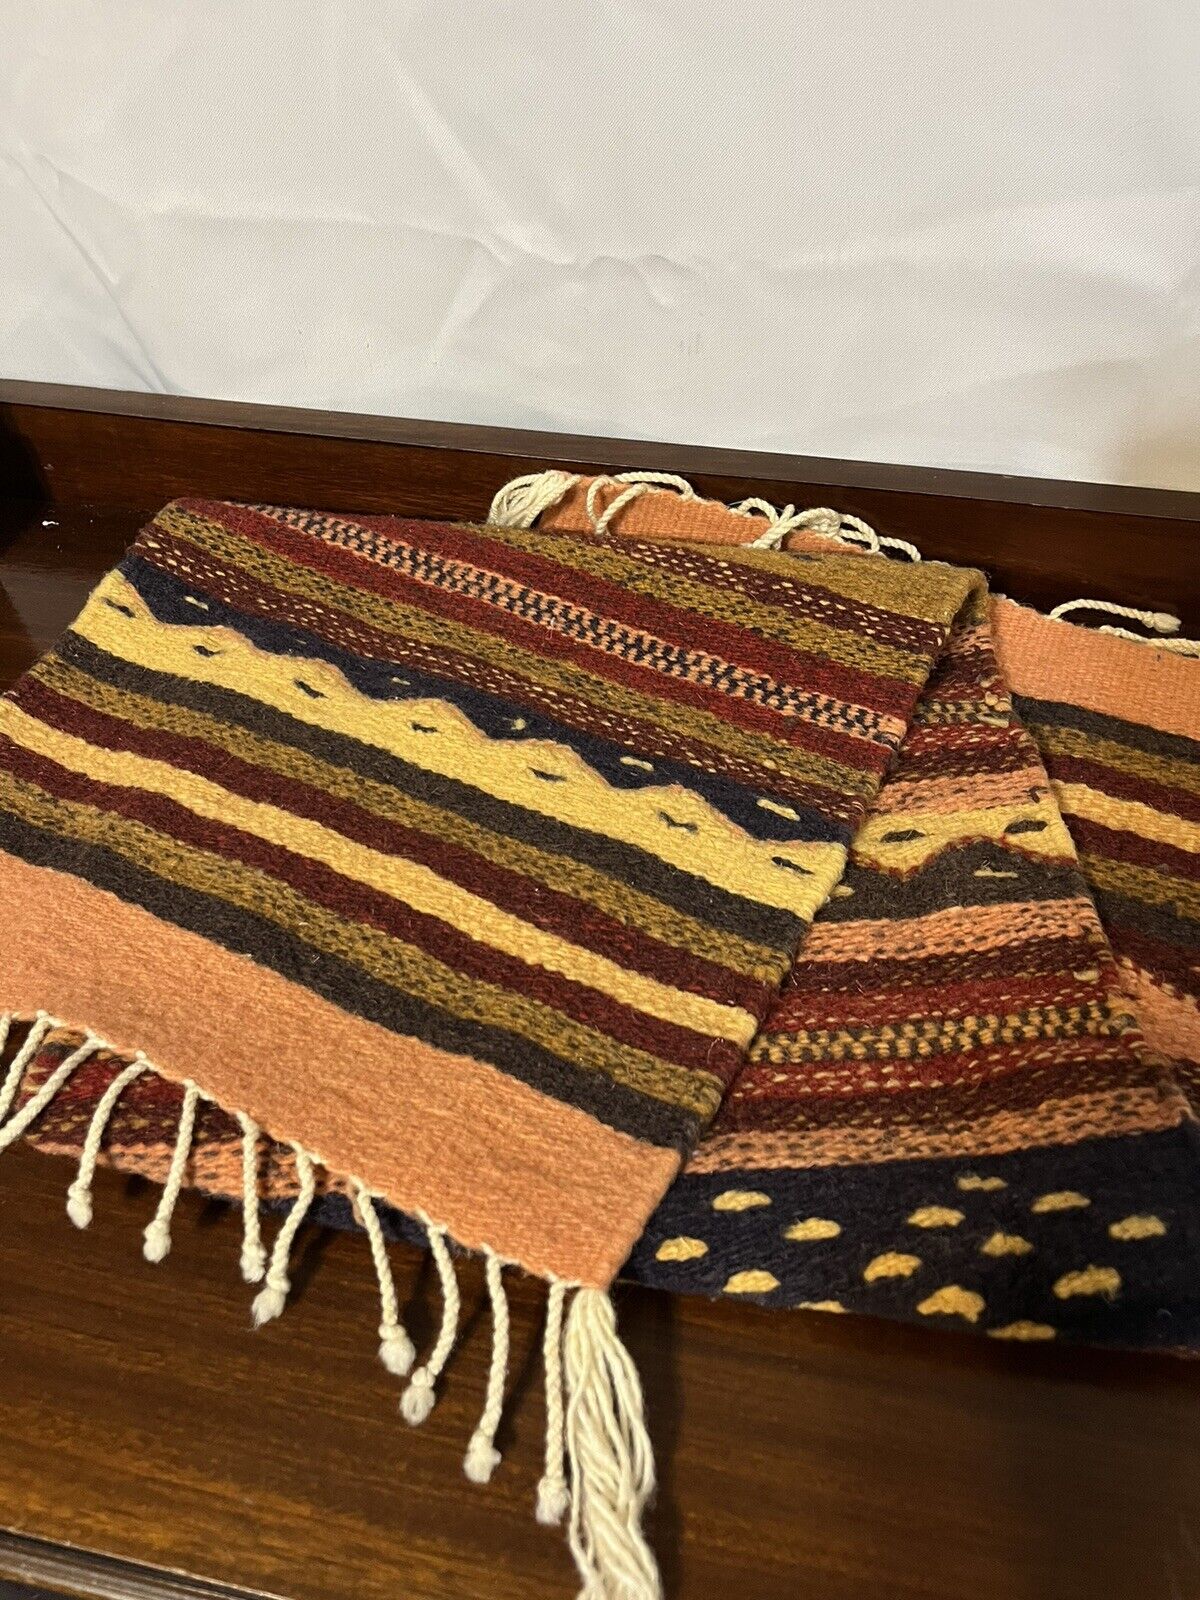 Southwest Zapotec Indian Table Runner 14”x40” 100% Wool